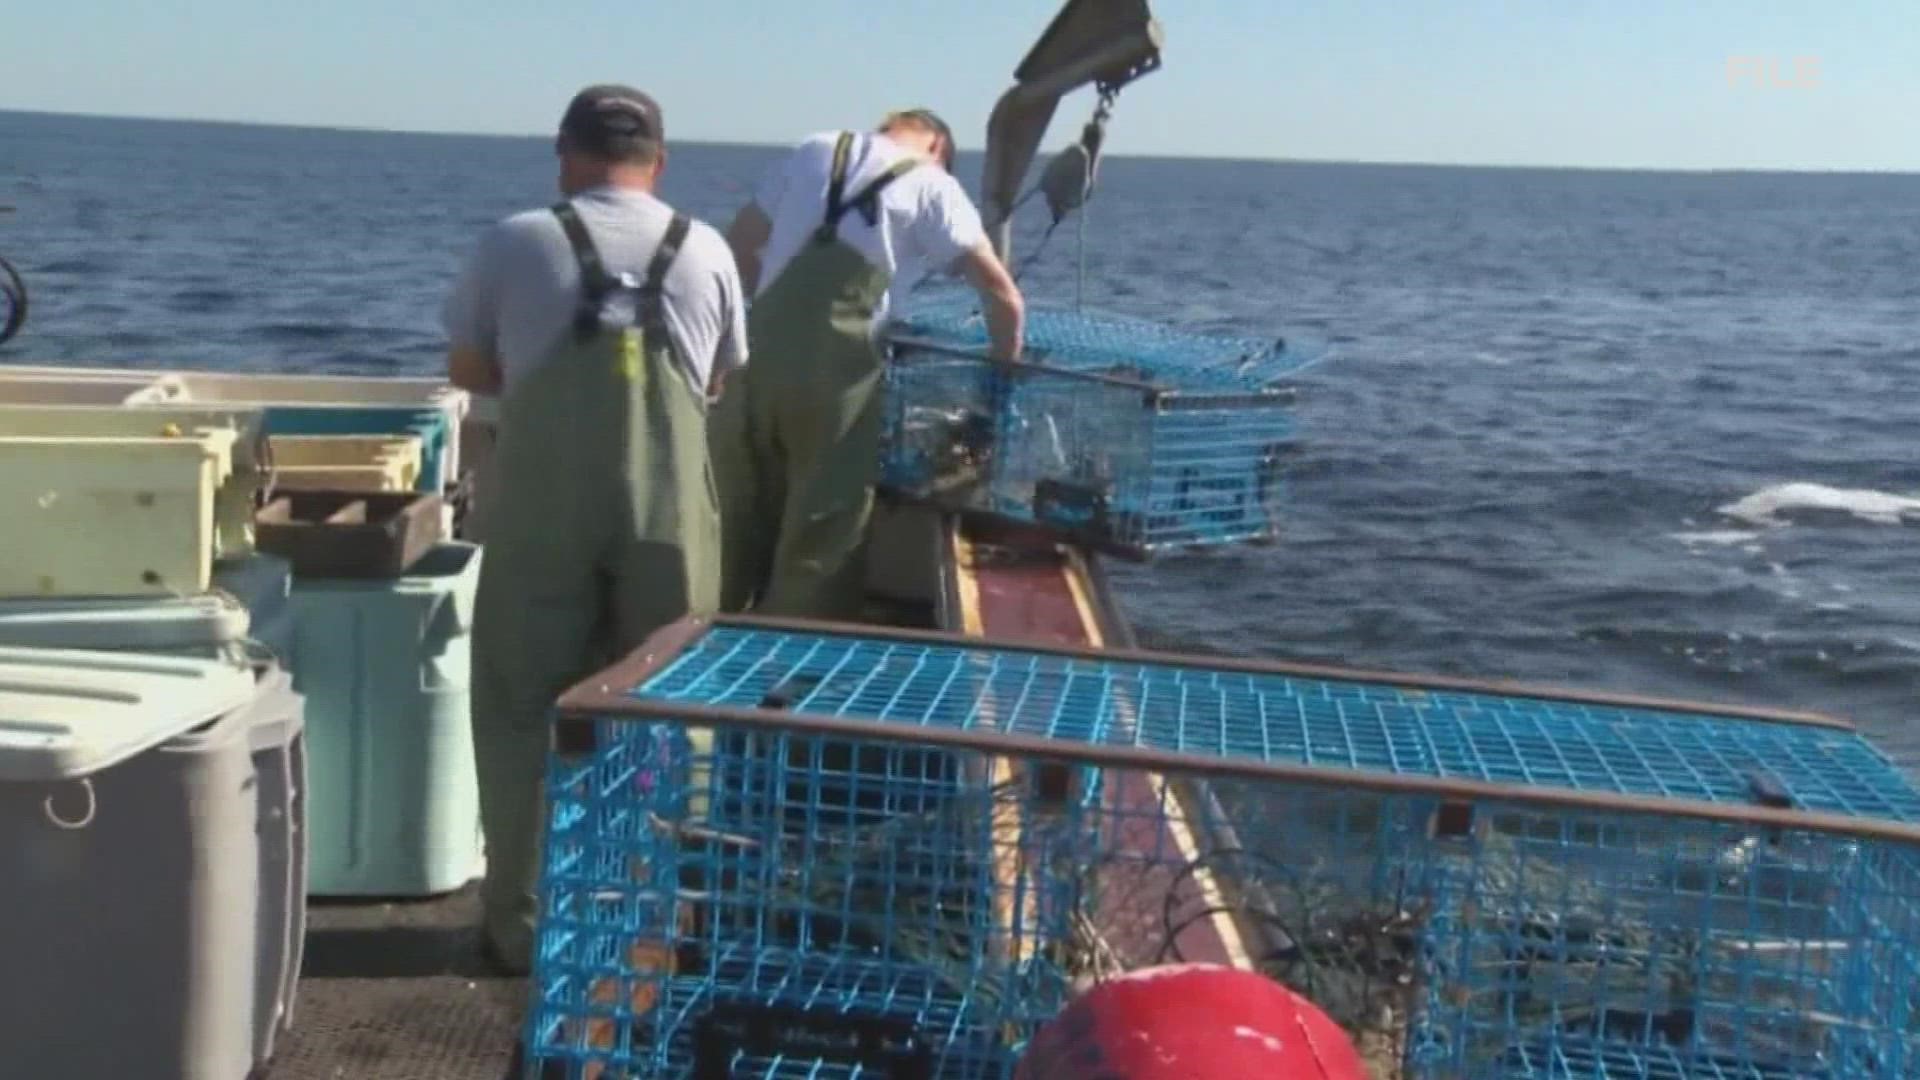 A U.S. appeals court reinstated a ban on lobster harvesting in hundreds of miles of productive fishing waters off the Maine coast.